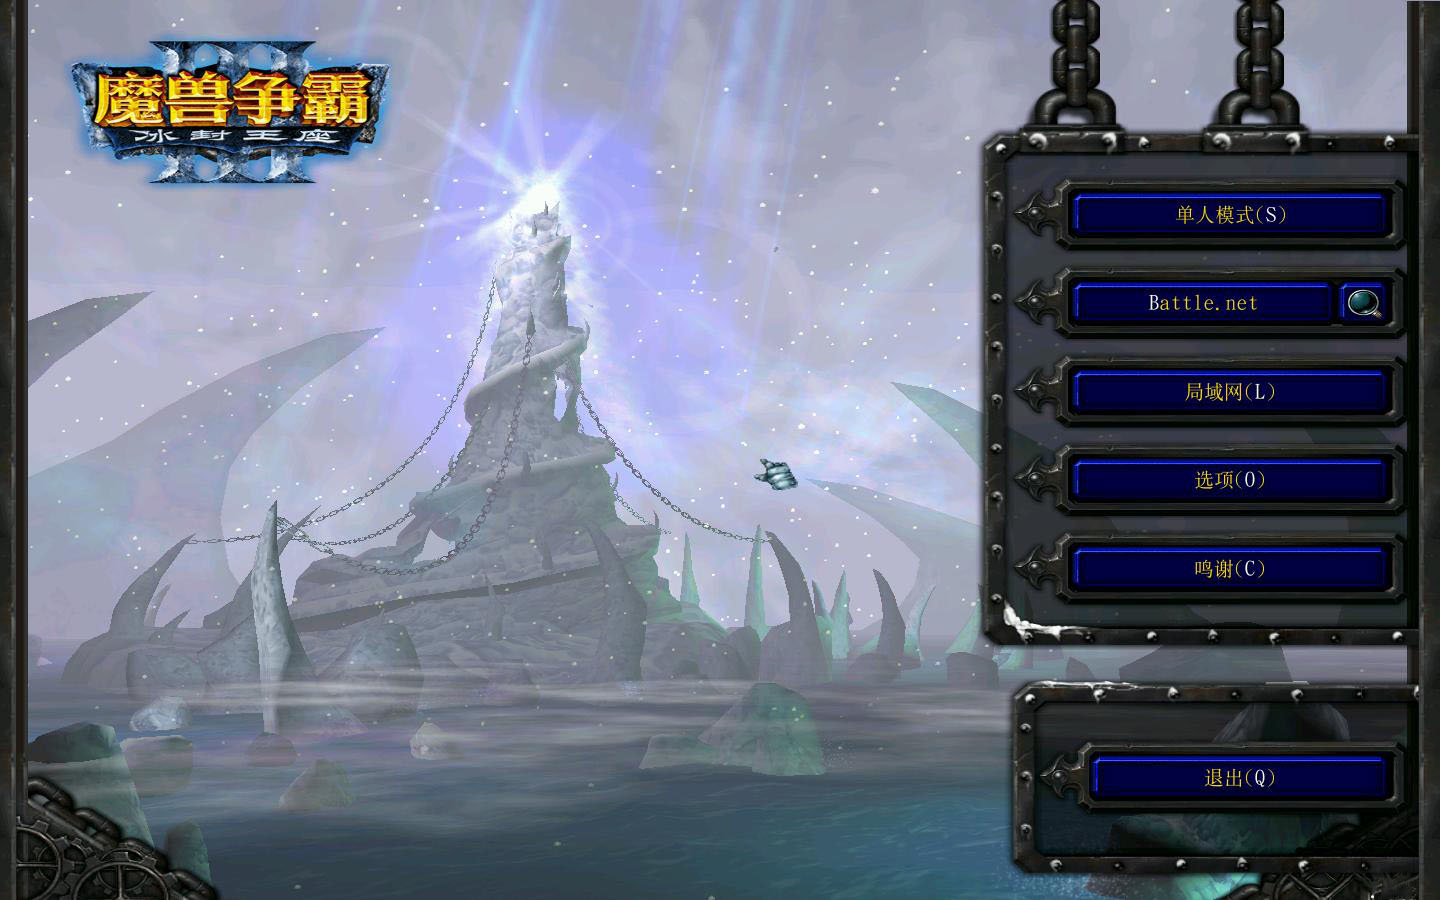 ħ3Warcraft III The Frozen Thronev1.24v4.2